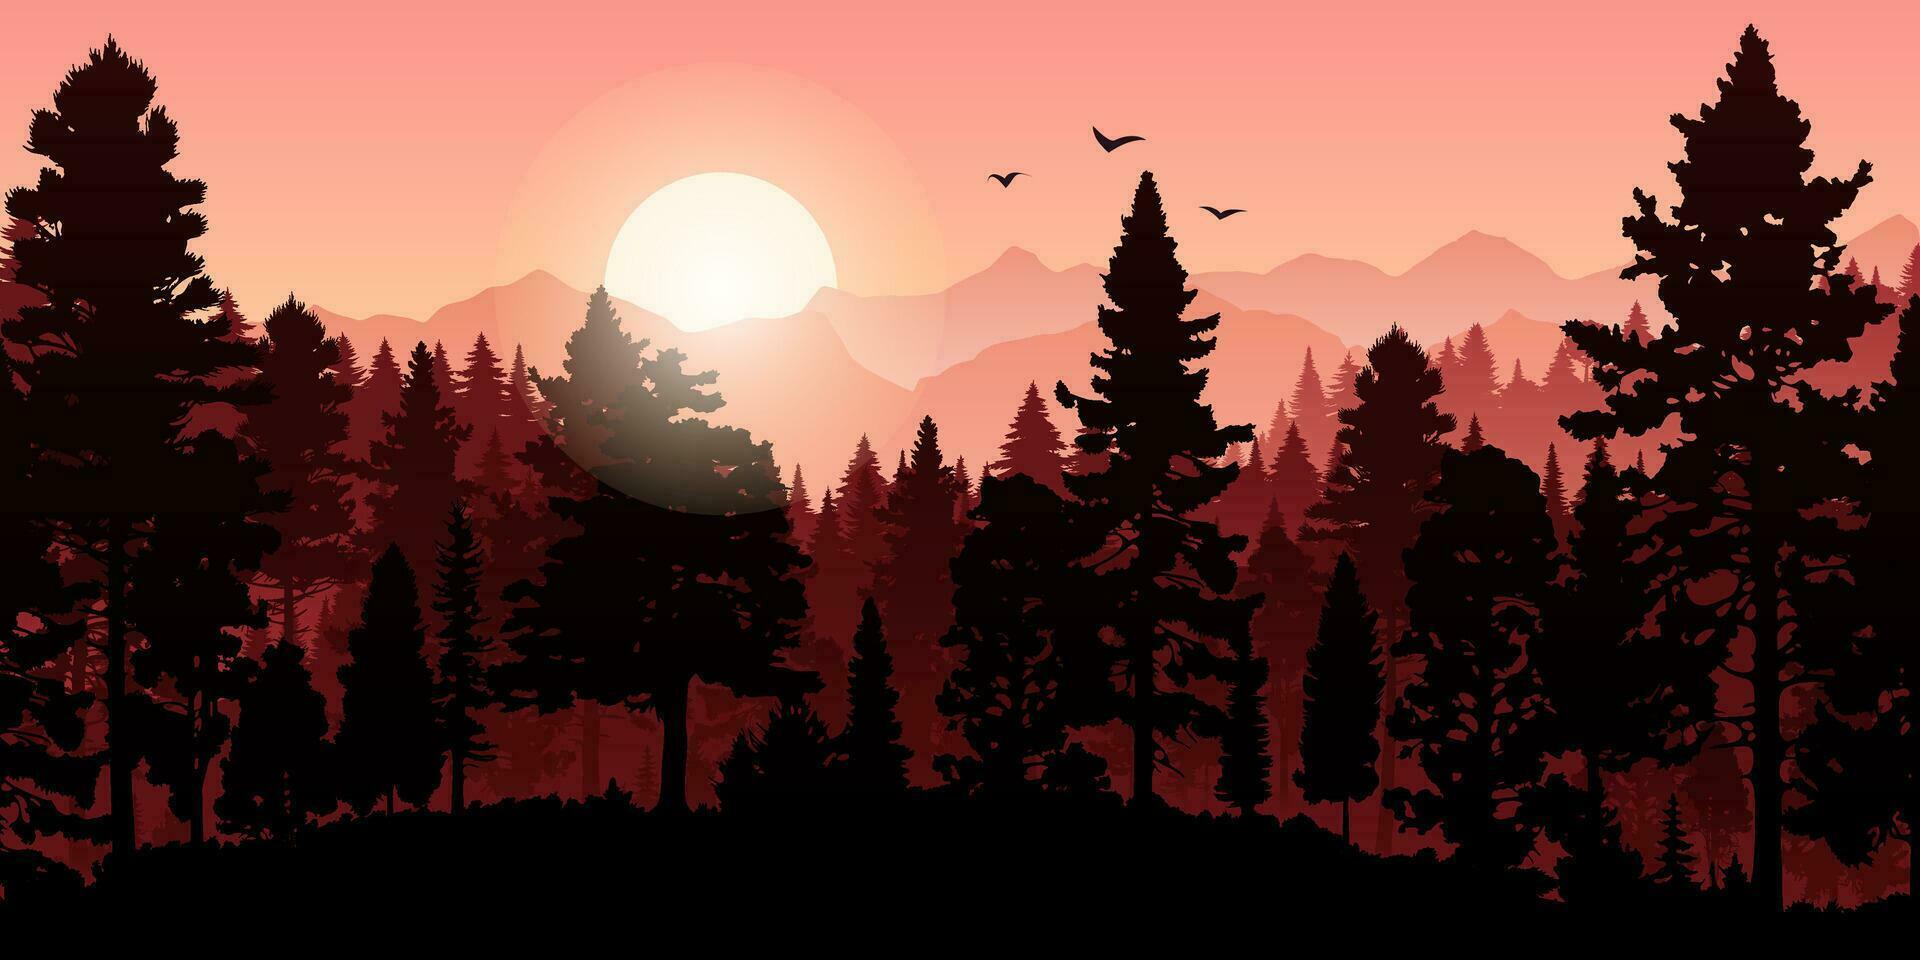 Beautiful red mountain landscape with fog, trees, rocks, birds and hills in silhouette against a sunrise or sunset sky. Perfect for nature and travel designs. panoramic silhouette, orange mountains. vector